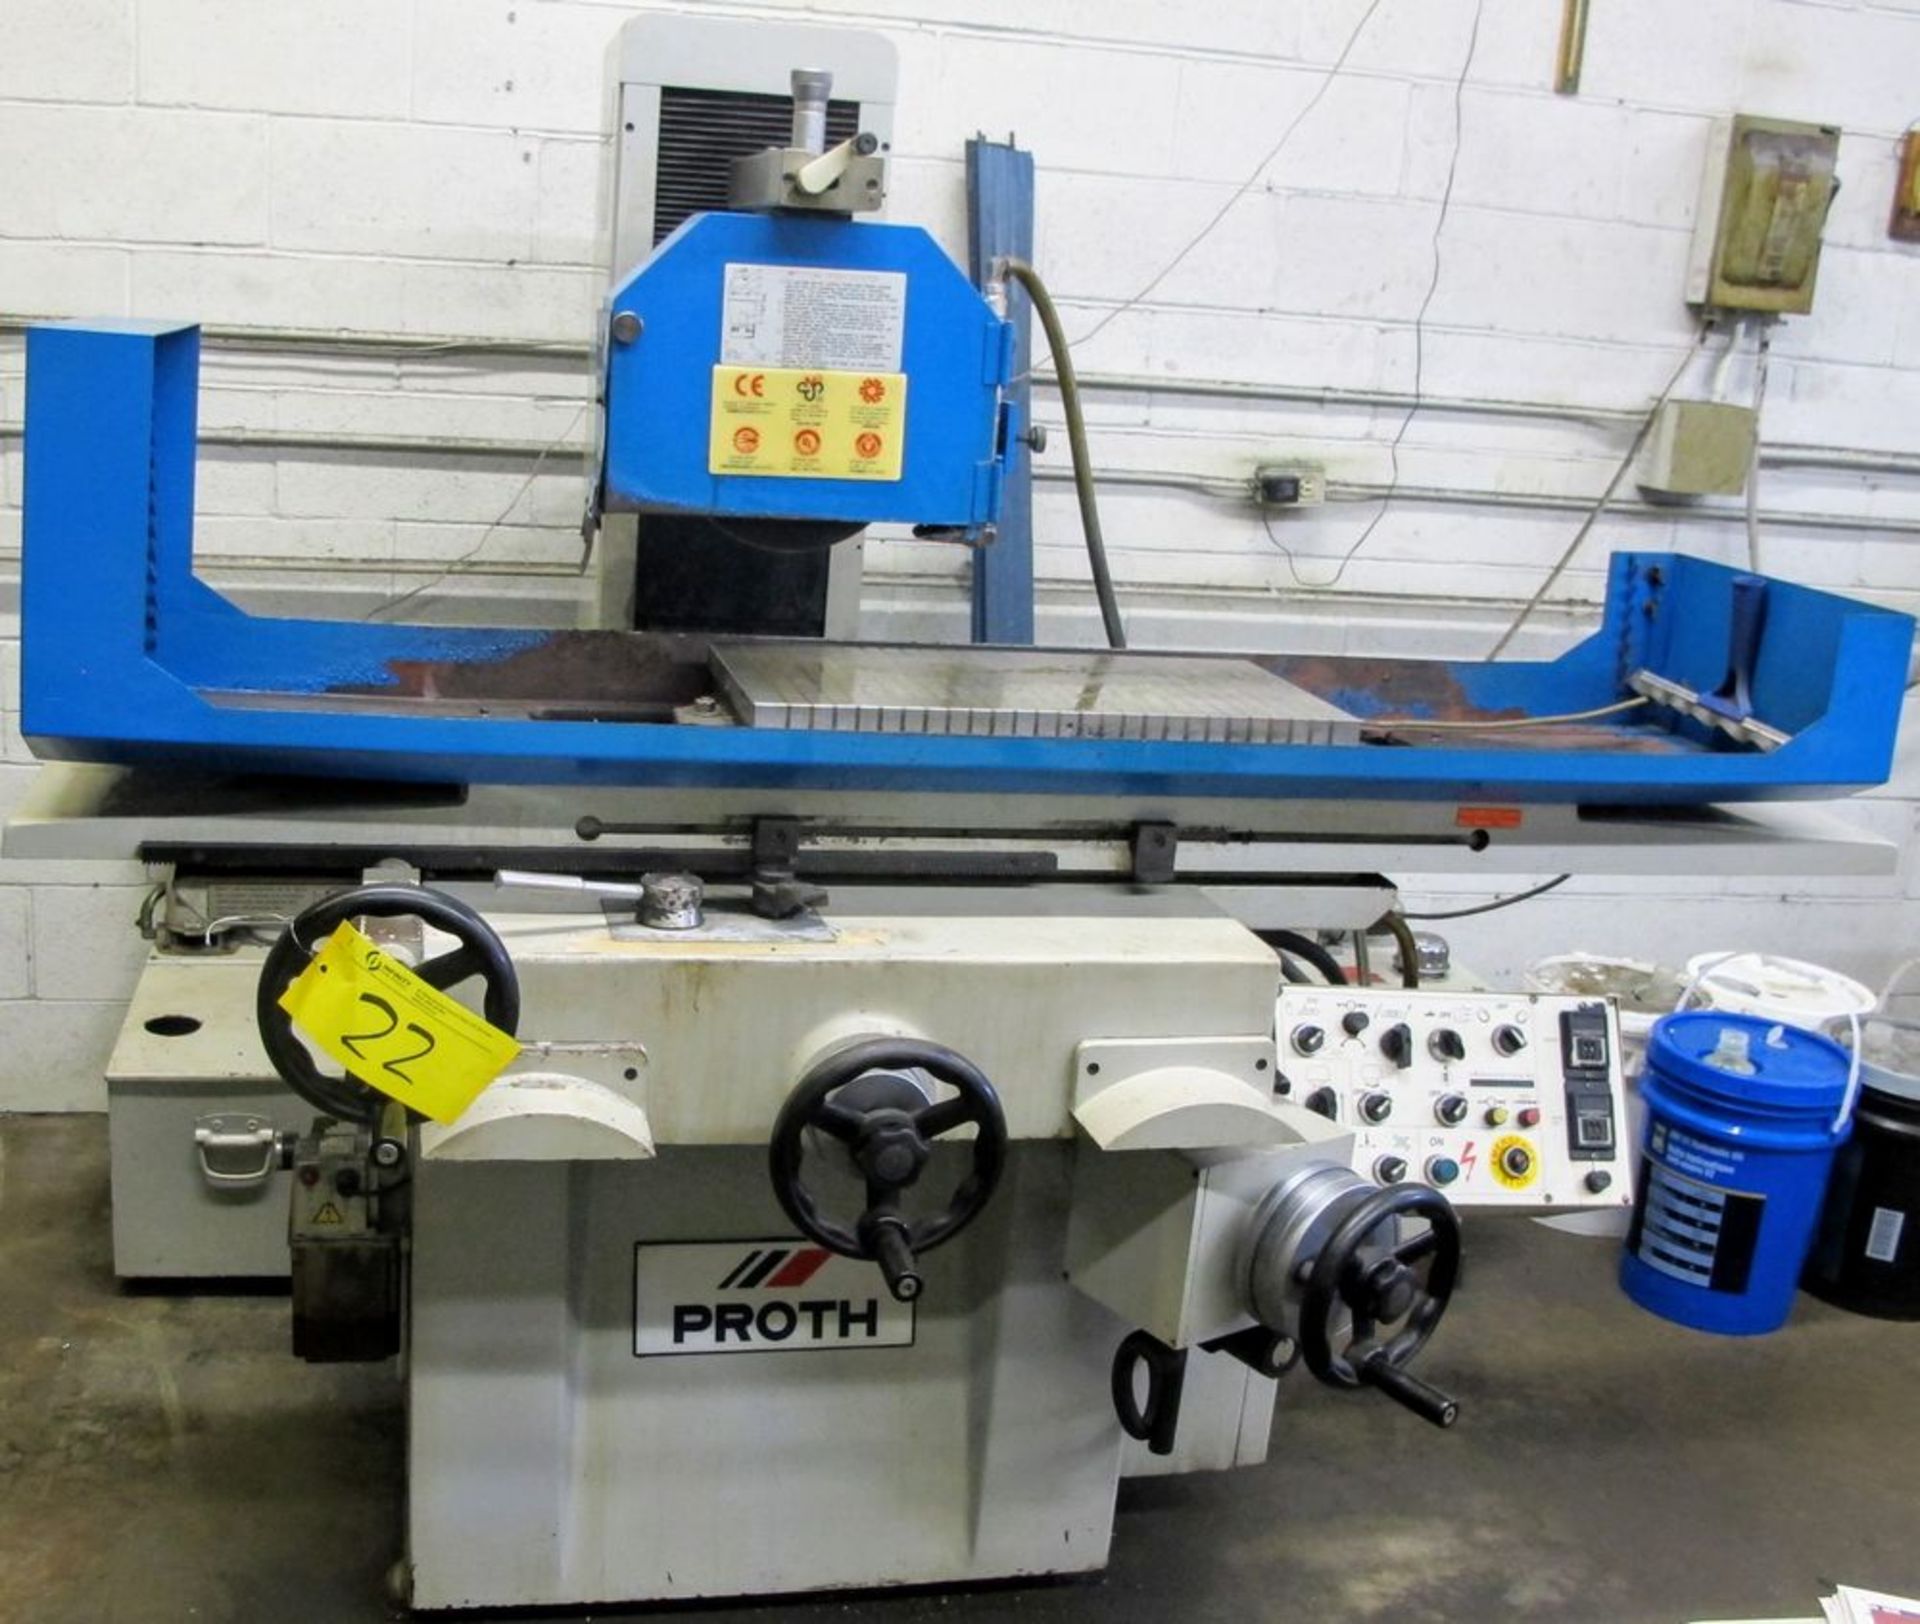 PROTH PSGS-3060AH SURFACE GRINDER, S/N 71207-11, 24" X 12" ELECTROMAGNETIC CHUCK, FULLY AUTOMATIC,